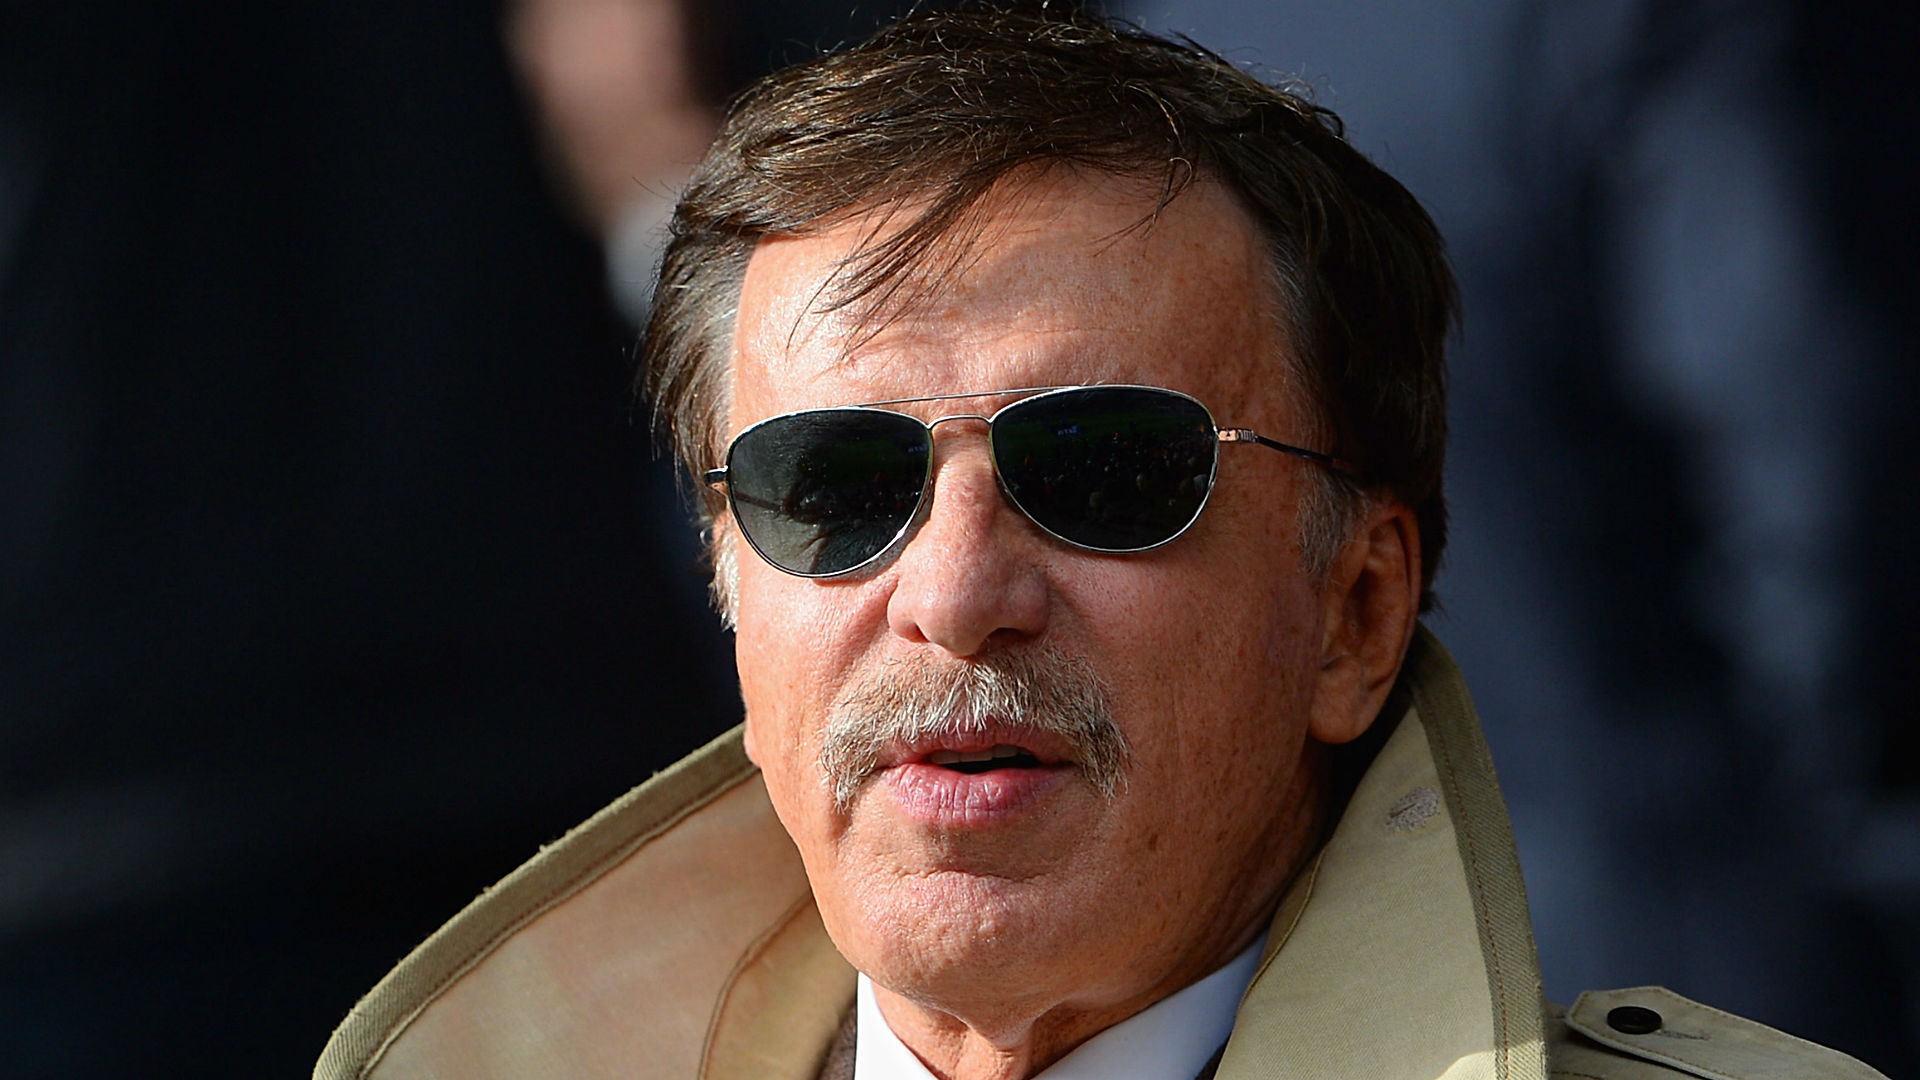 The much hated Stan Kroenke, who owns the controlling shares in Arsenal F.C.